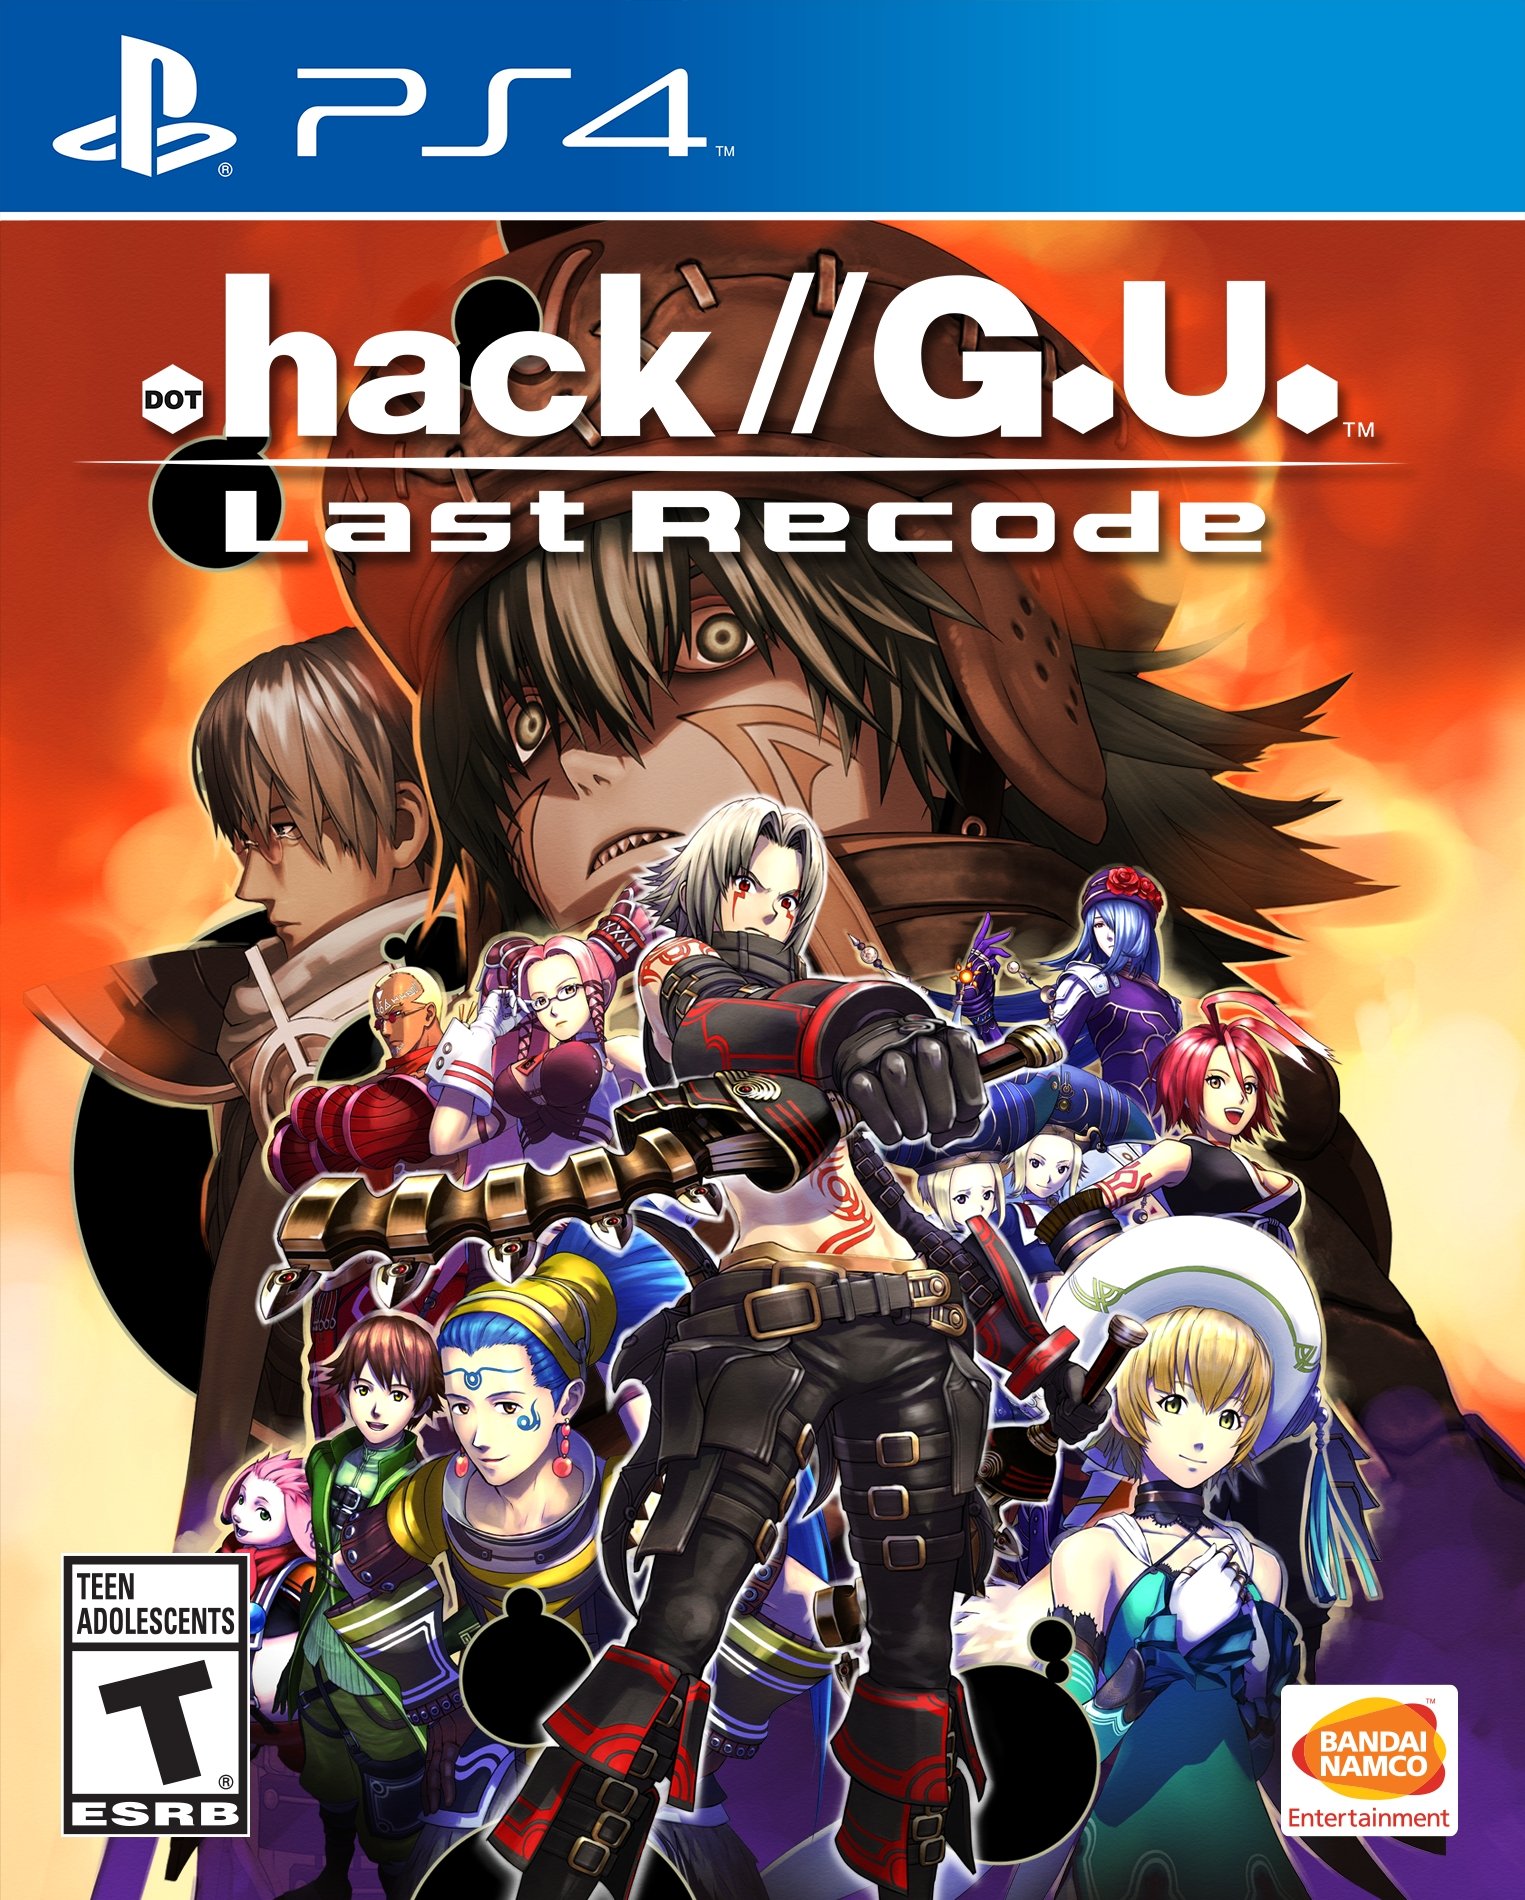 .hack//G.U. Last Recode PS4 physical edition announced for ...